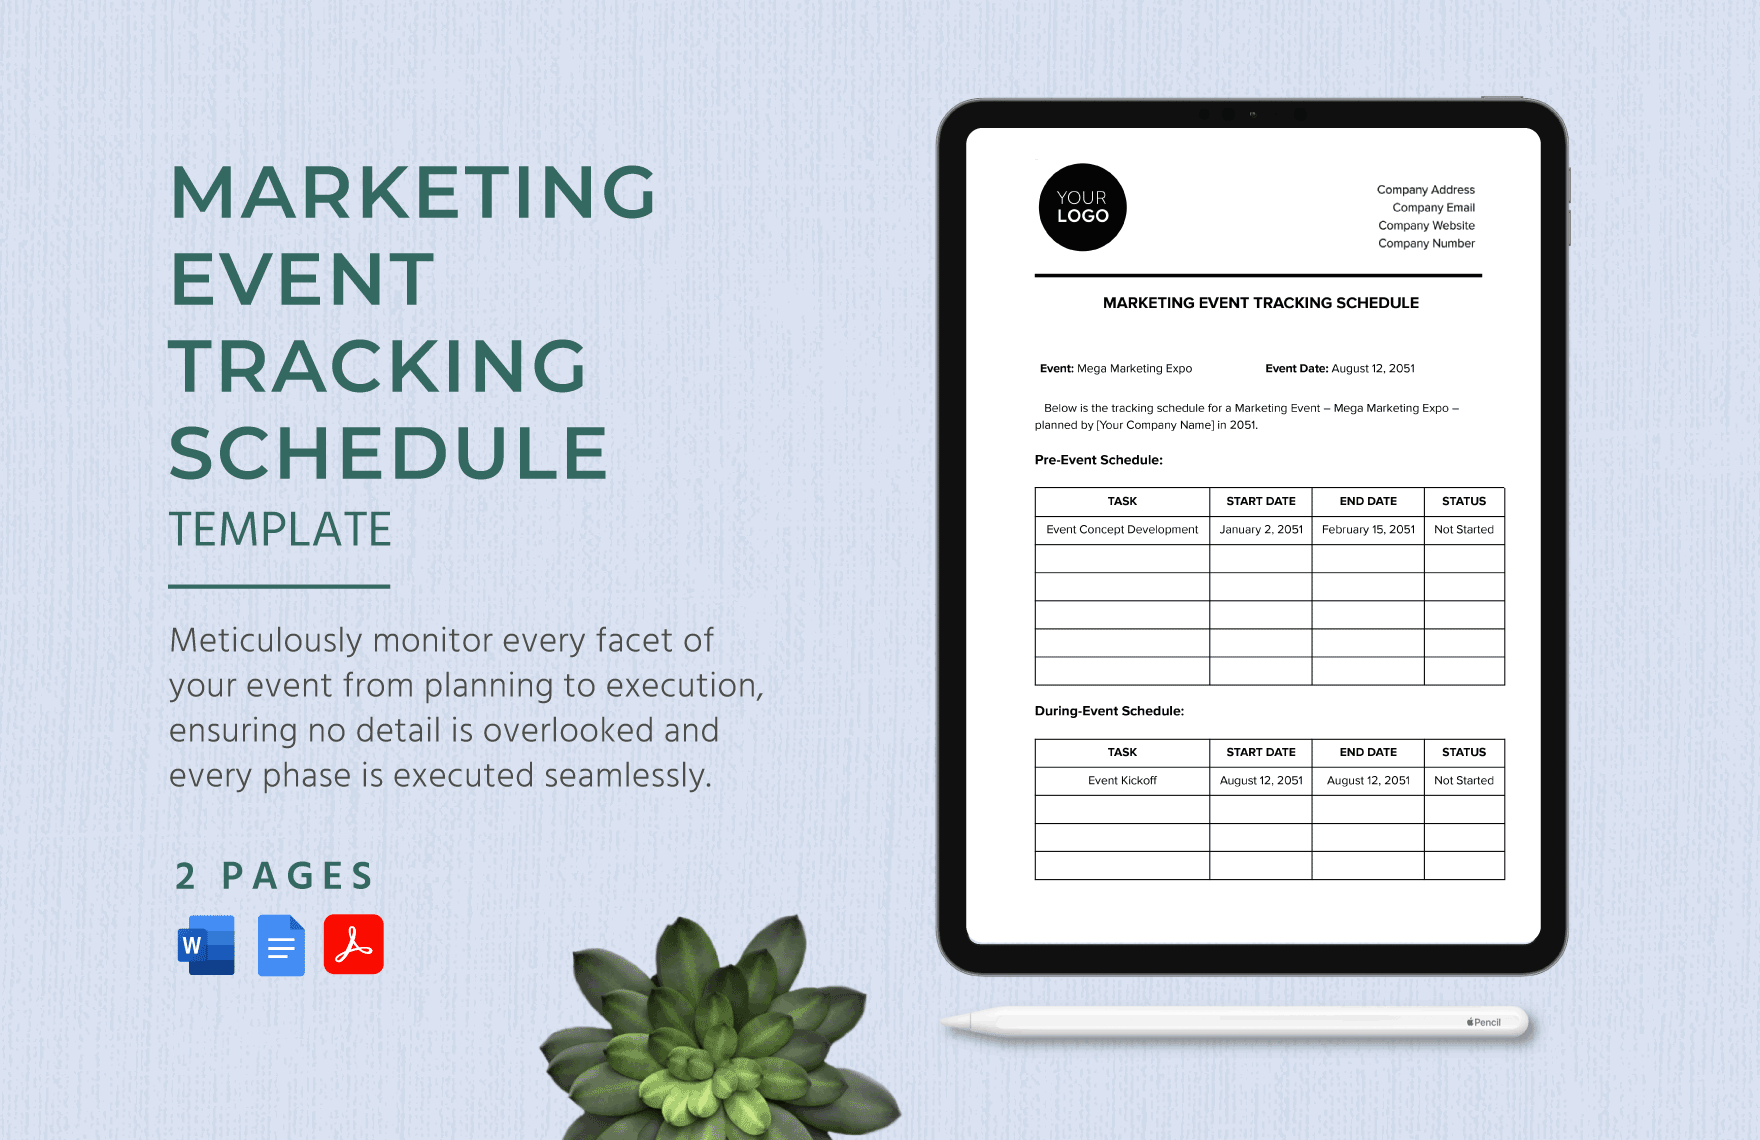 Marketing Event Tracking Schedule Template in Word, Google Docs, PDF